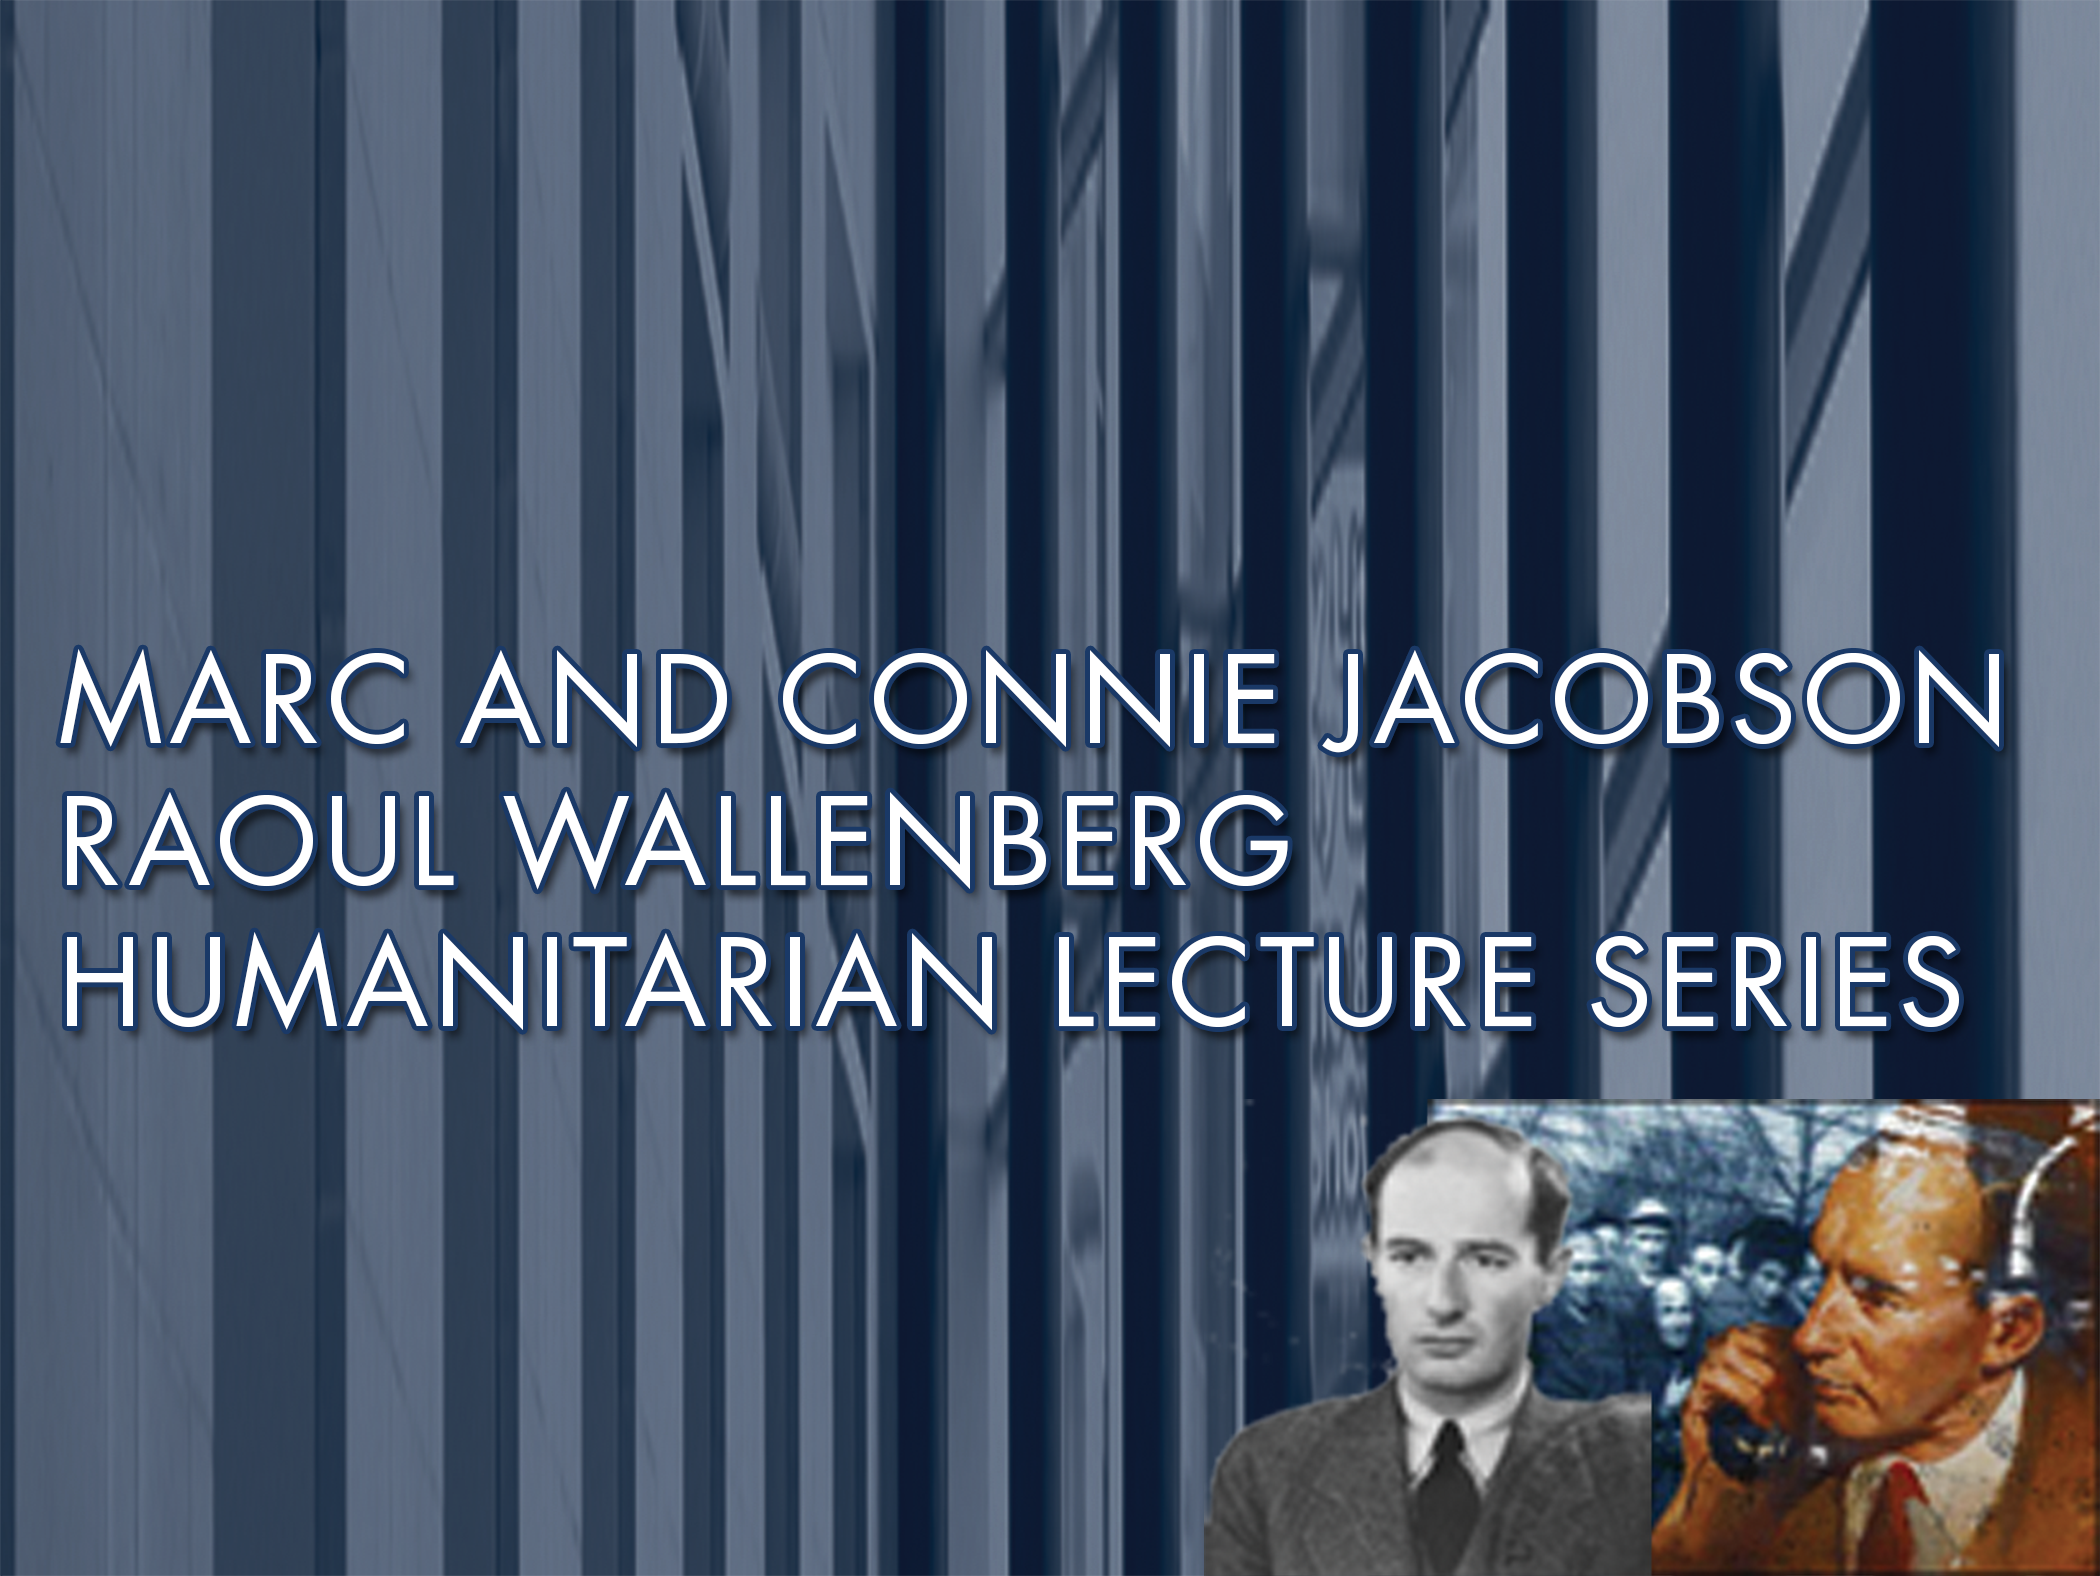 Raoul Wallenberg Humanitarian Lecture